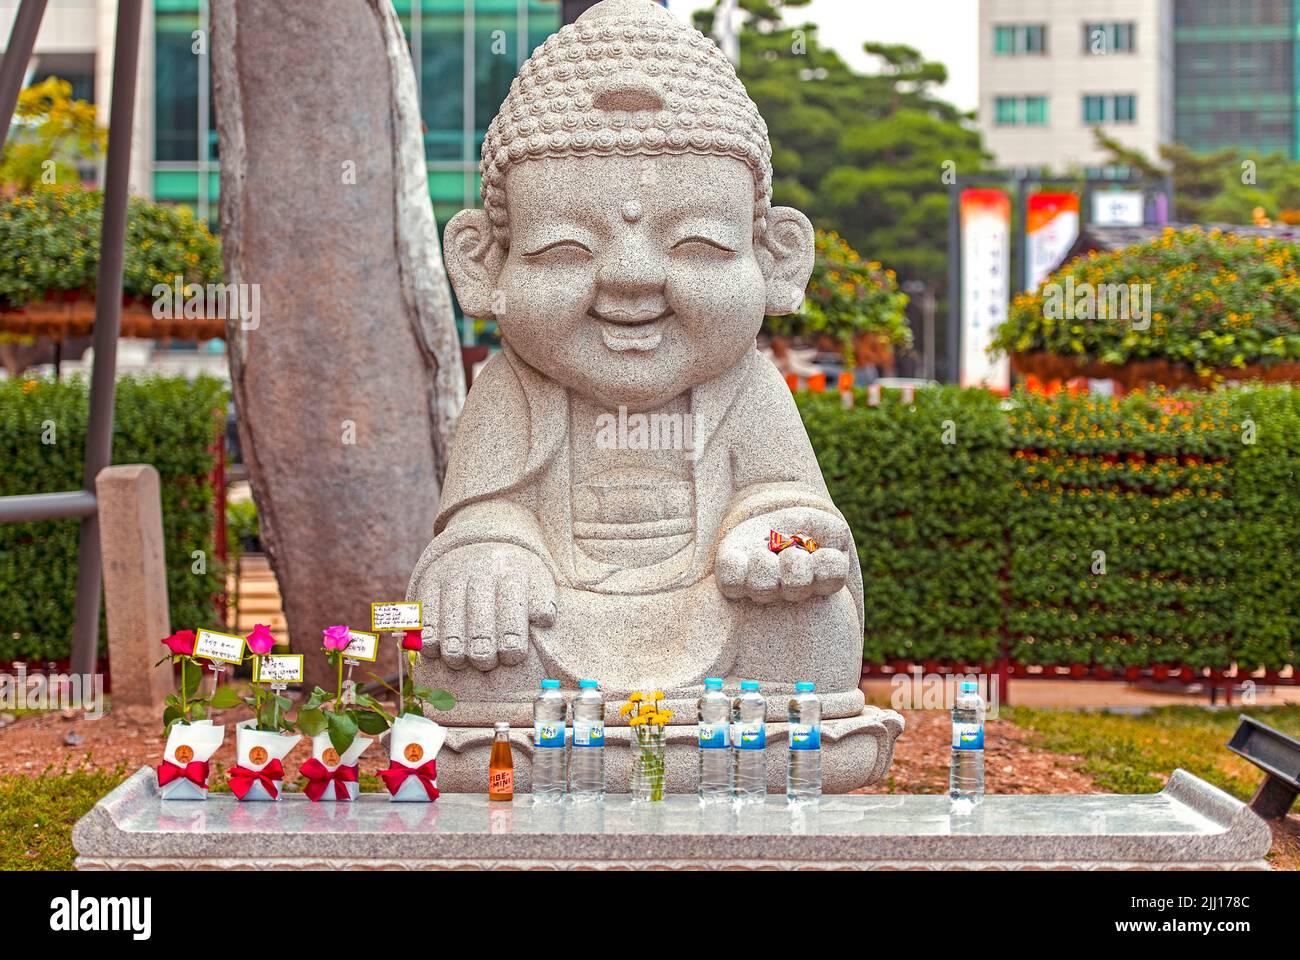 SEOUL - OCT 01: Smiling stone buddha statue with gifts  at the Jogyesa temple in Seoul, October 01. 2016 in South Korea Stock Photo